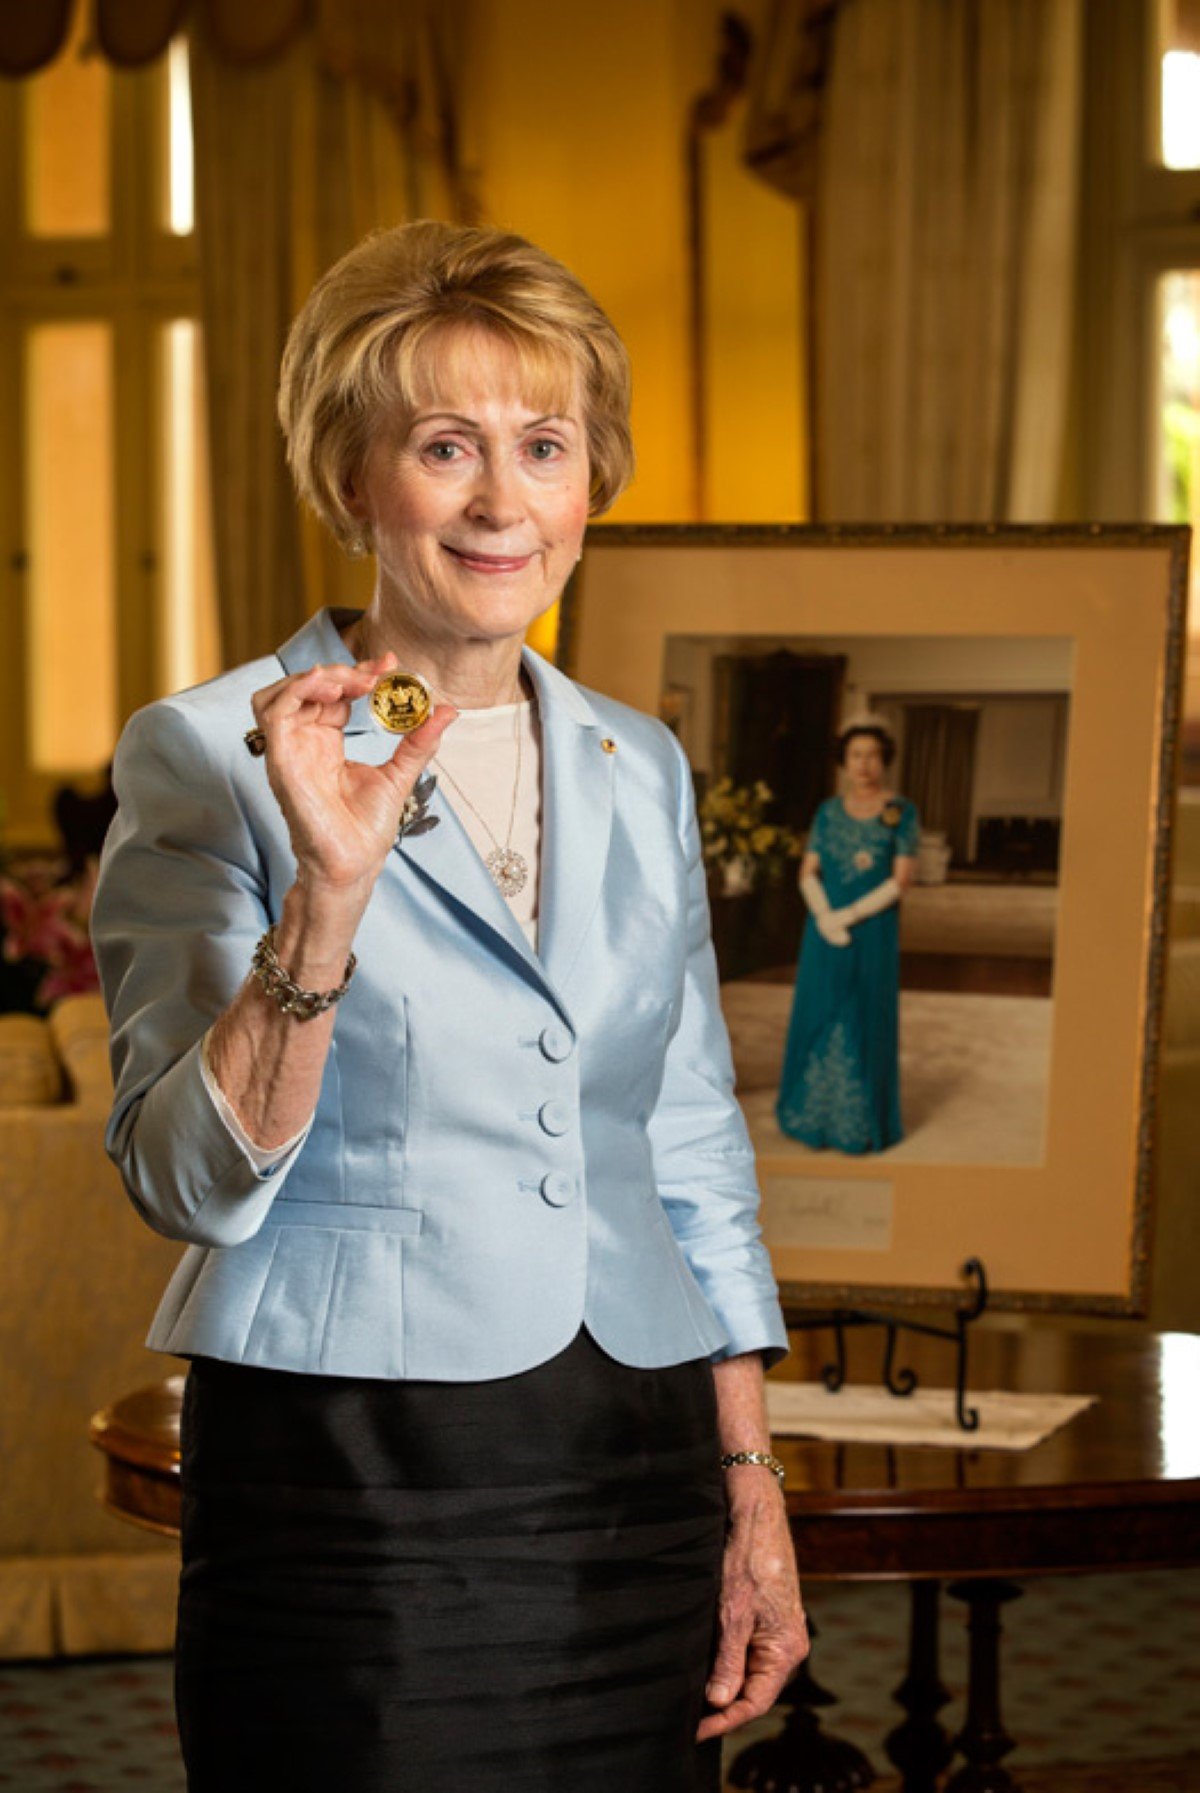 The Honourable Kerry Sanderson holding a Perth Mint coin